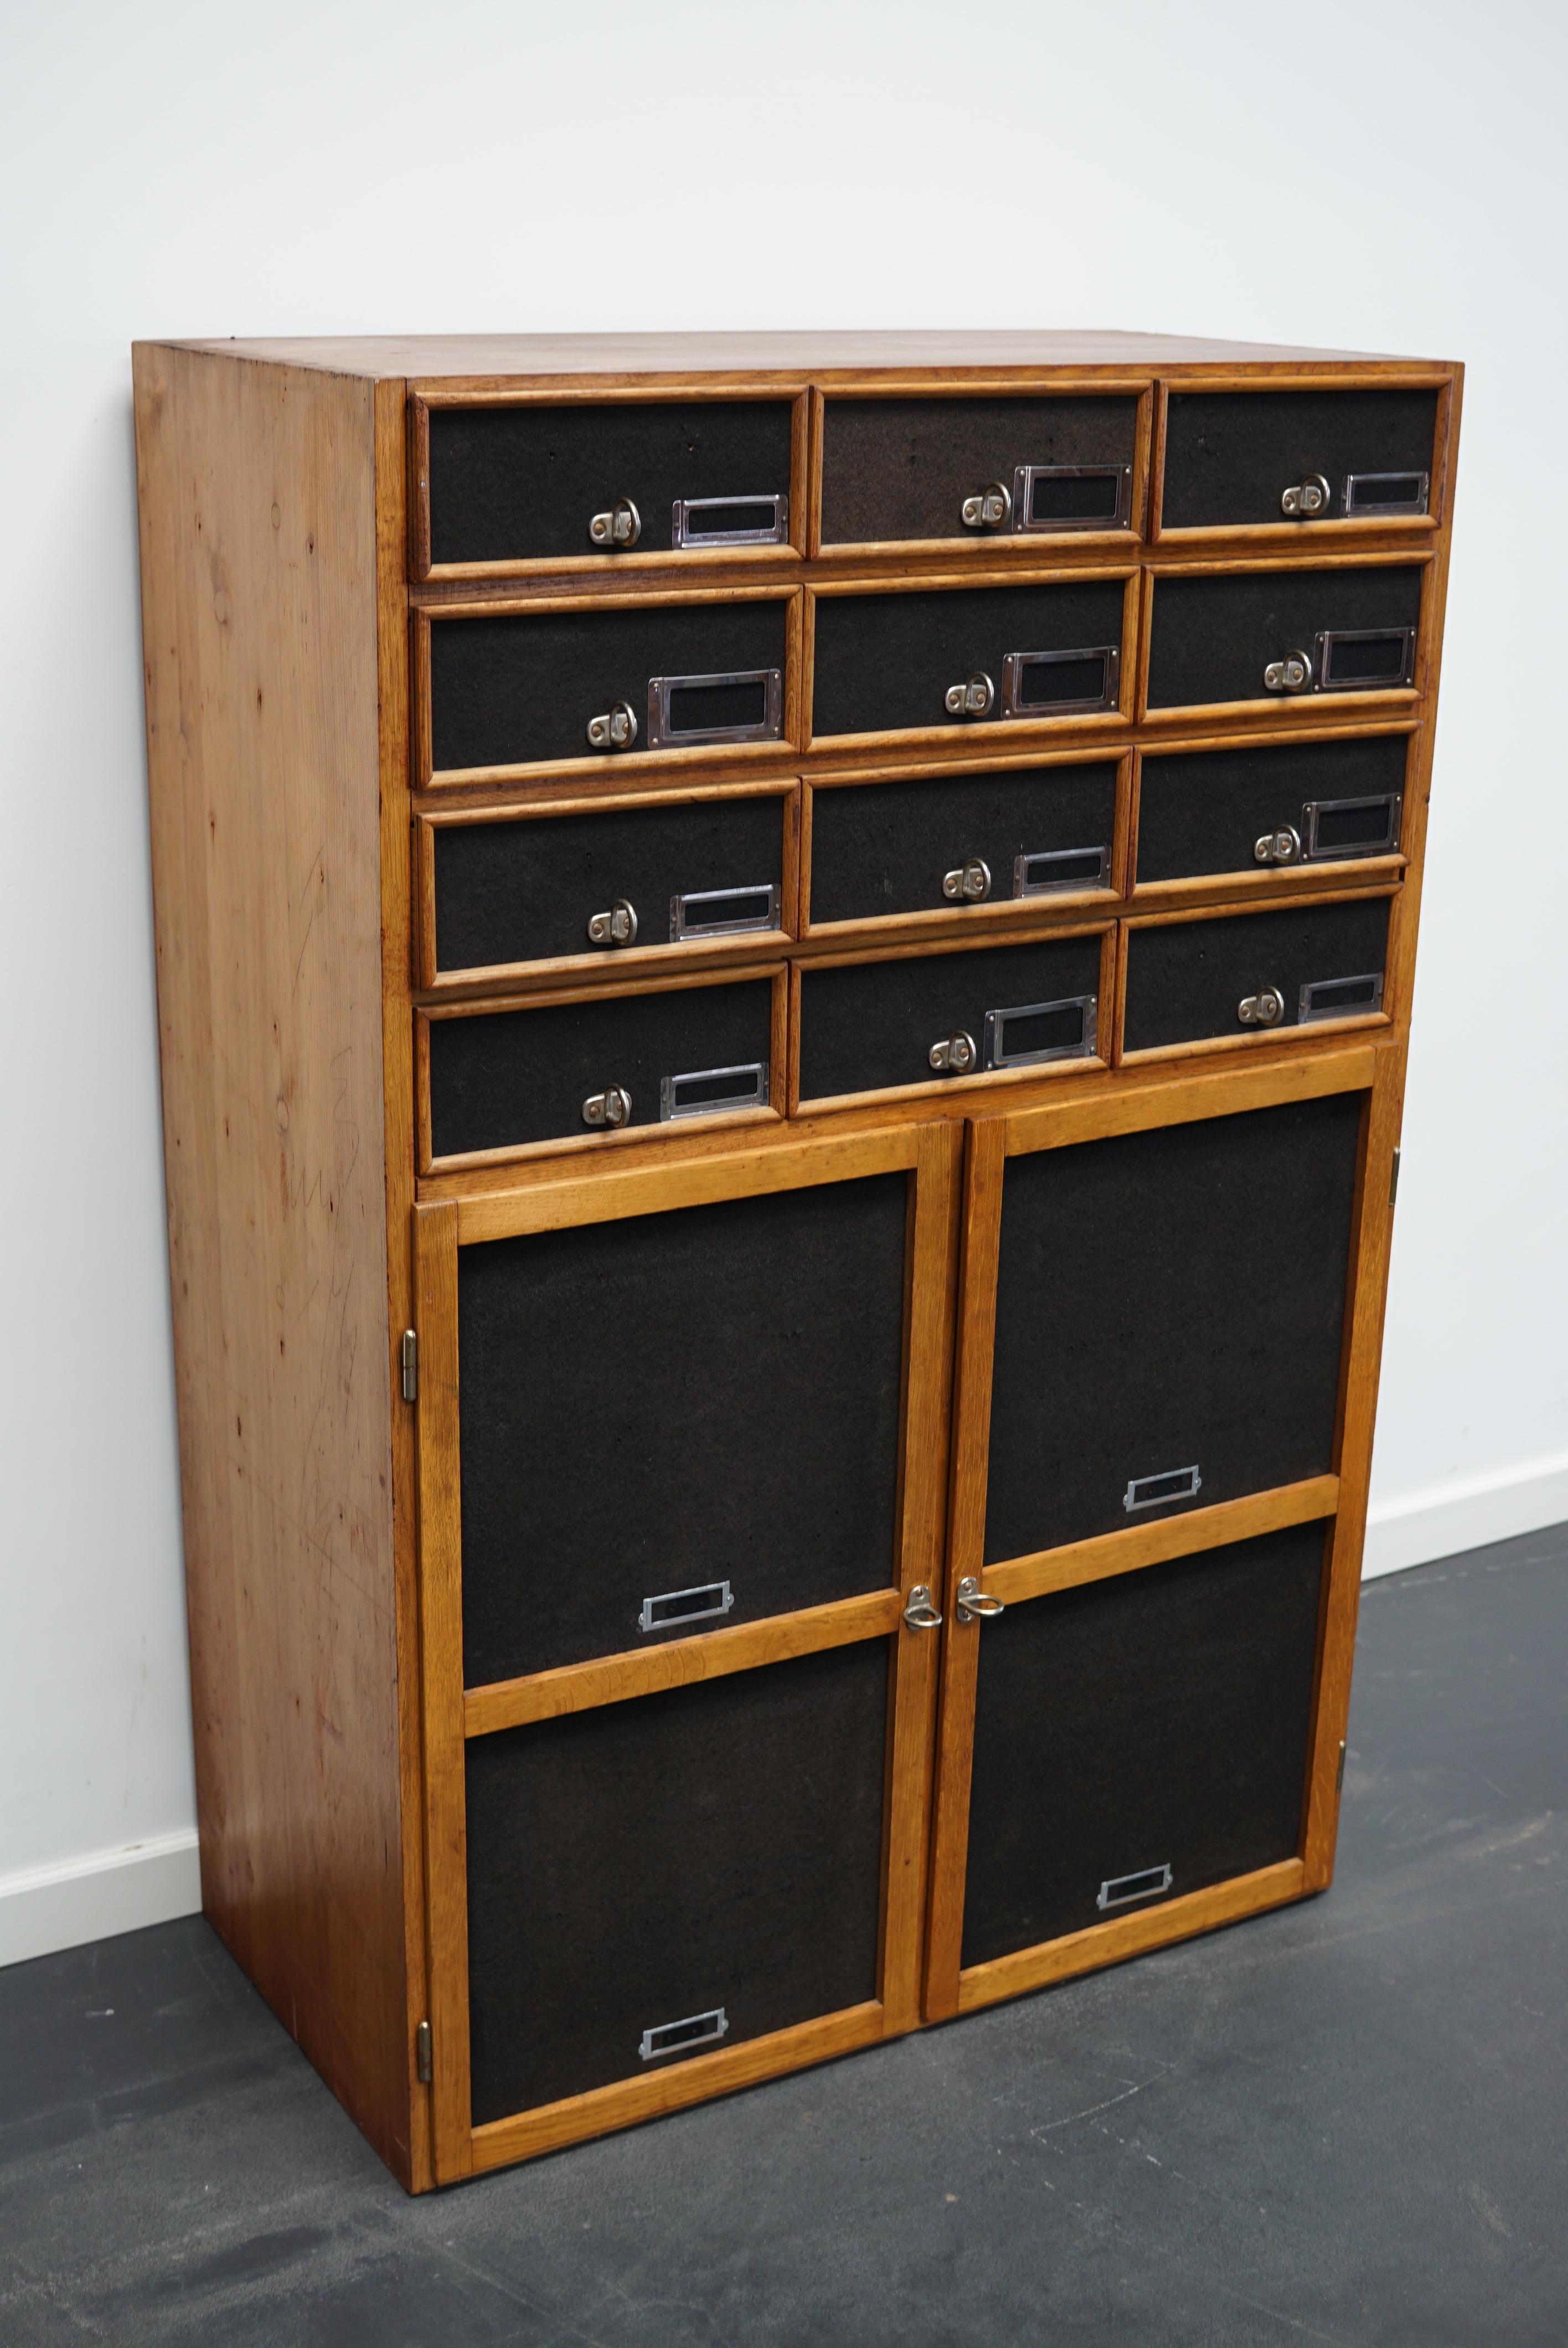 This apothecary cabinet was made circa 1940s in Germany and was later used in a hardware store in Belgium until recently. It features 12 drawers with metal handles / name card holders and two doors at the bottom with two shelves behind them. The